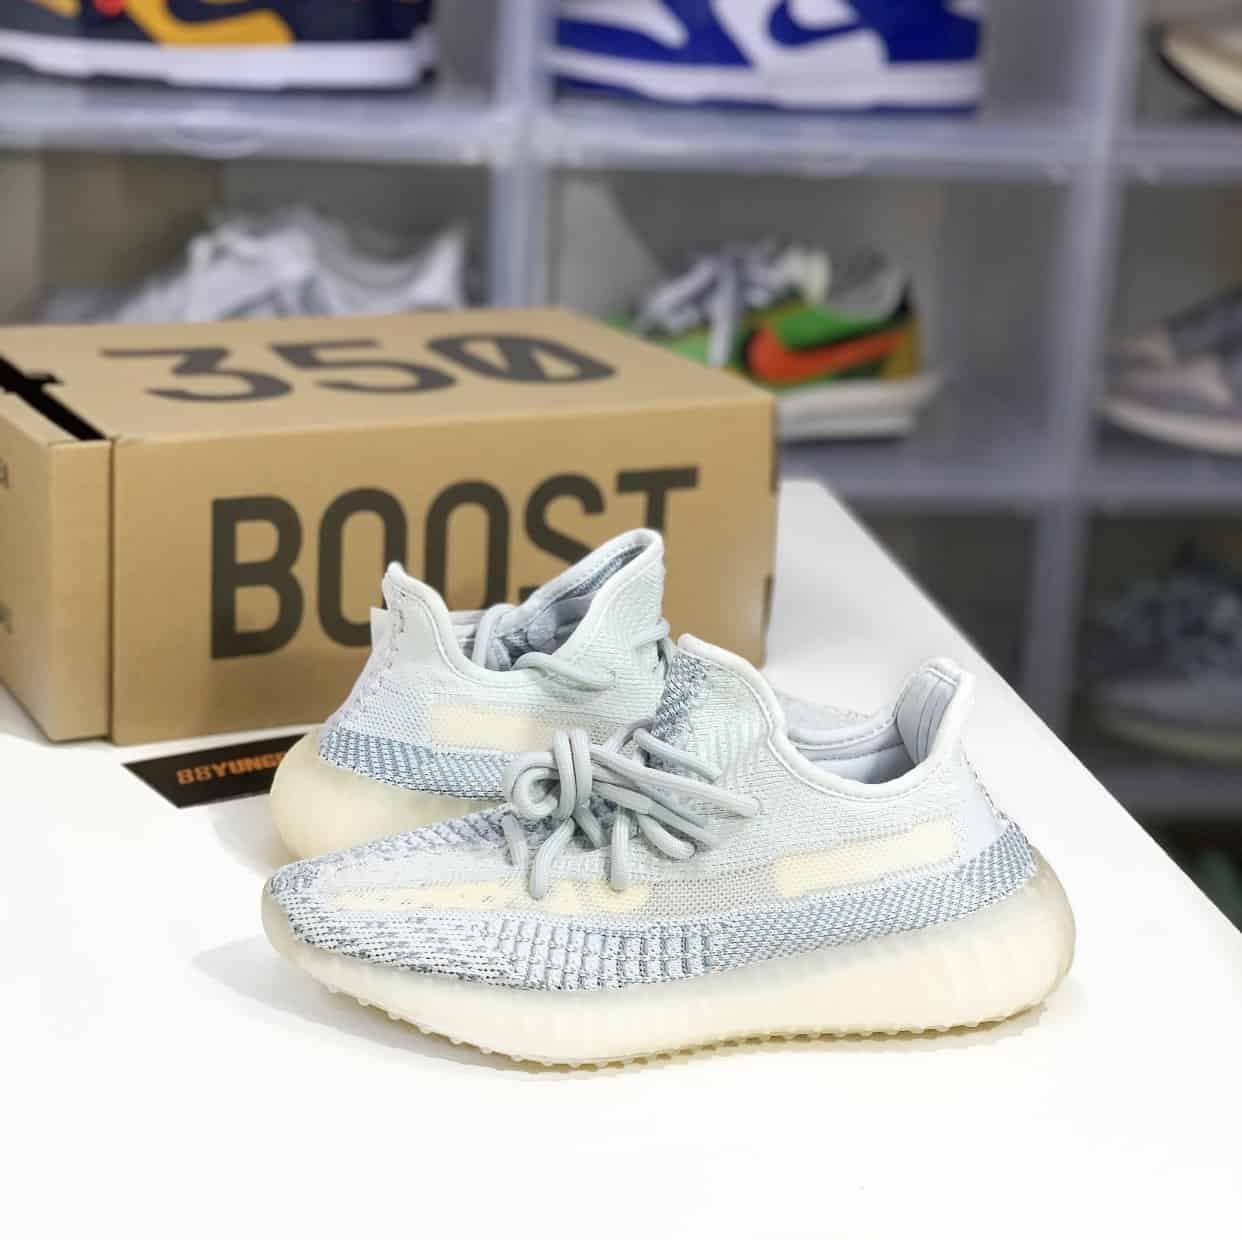 Adidas Yeezy Boost 350 V2 Cloud White - Non Reflective